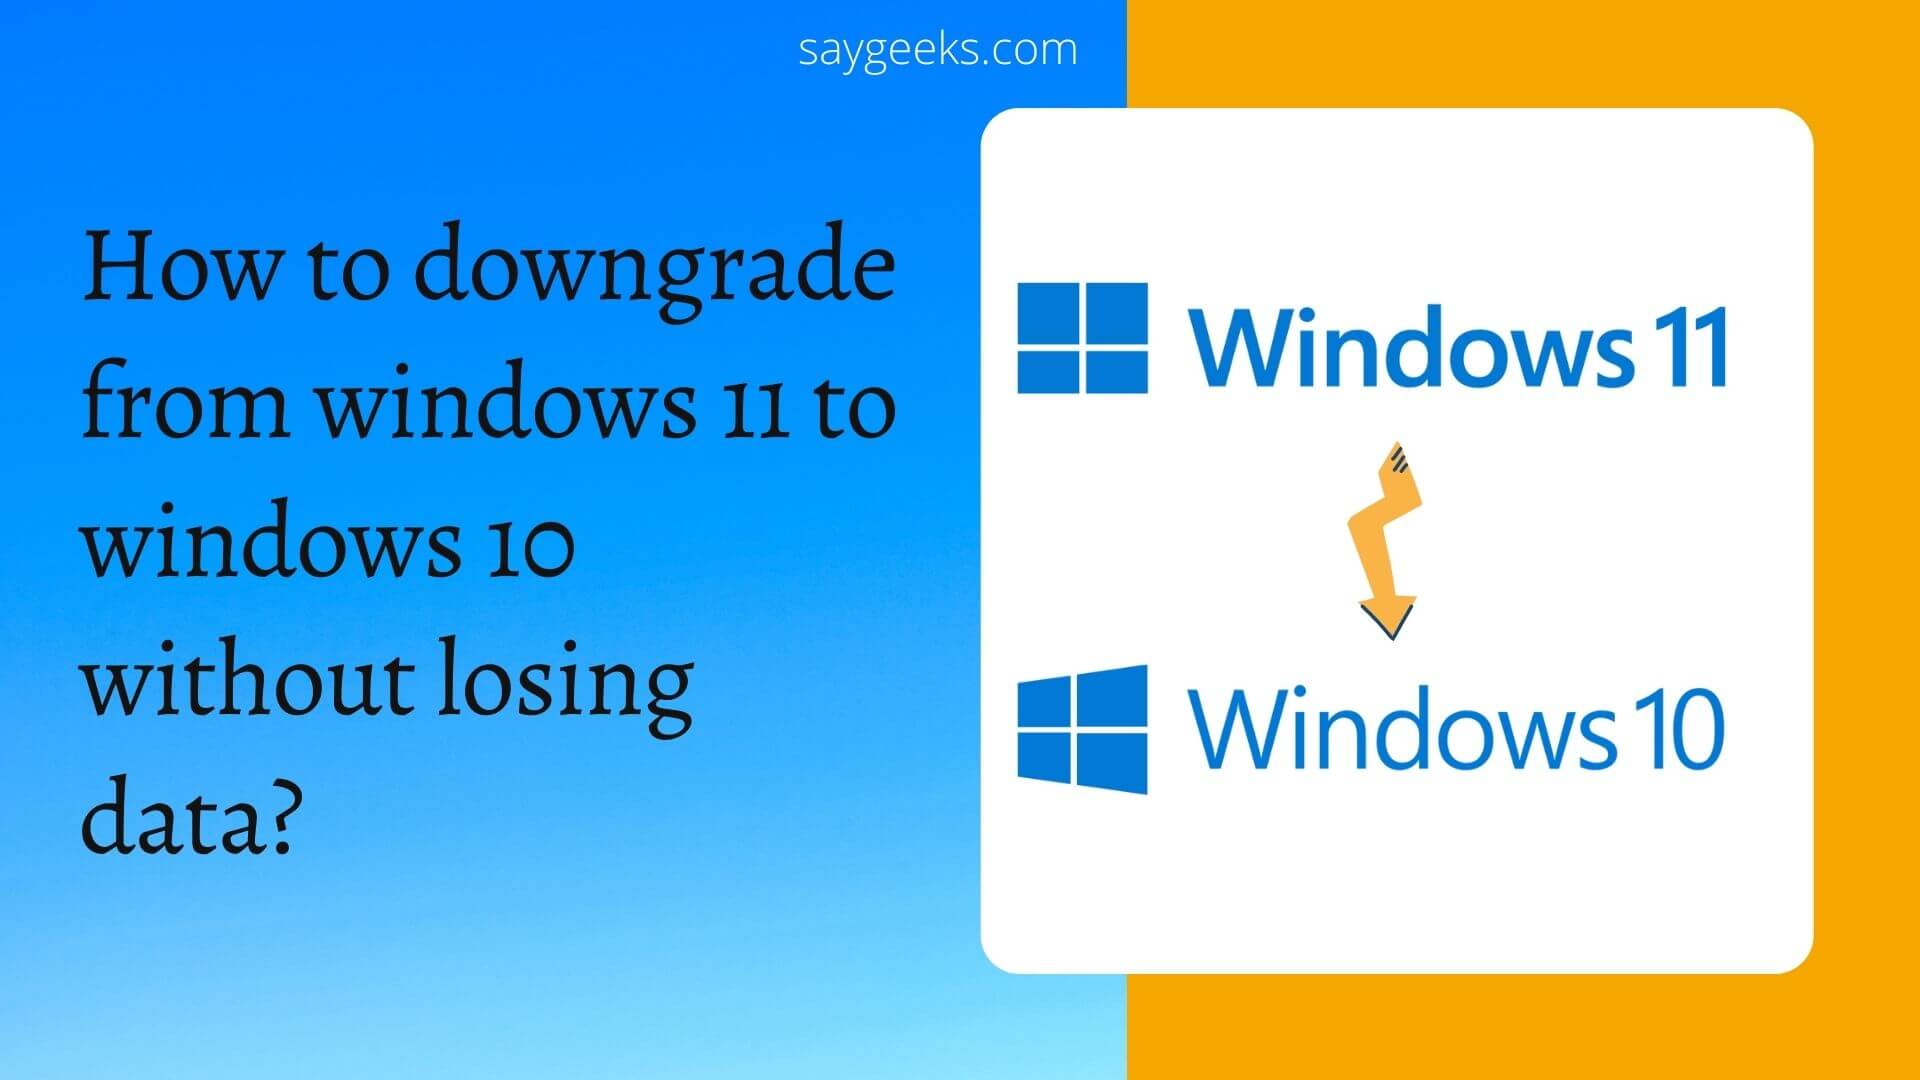 How to downgrade from windows 11 to windows 10 without losing data? [within 30 minutes] 1